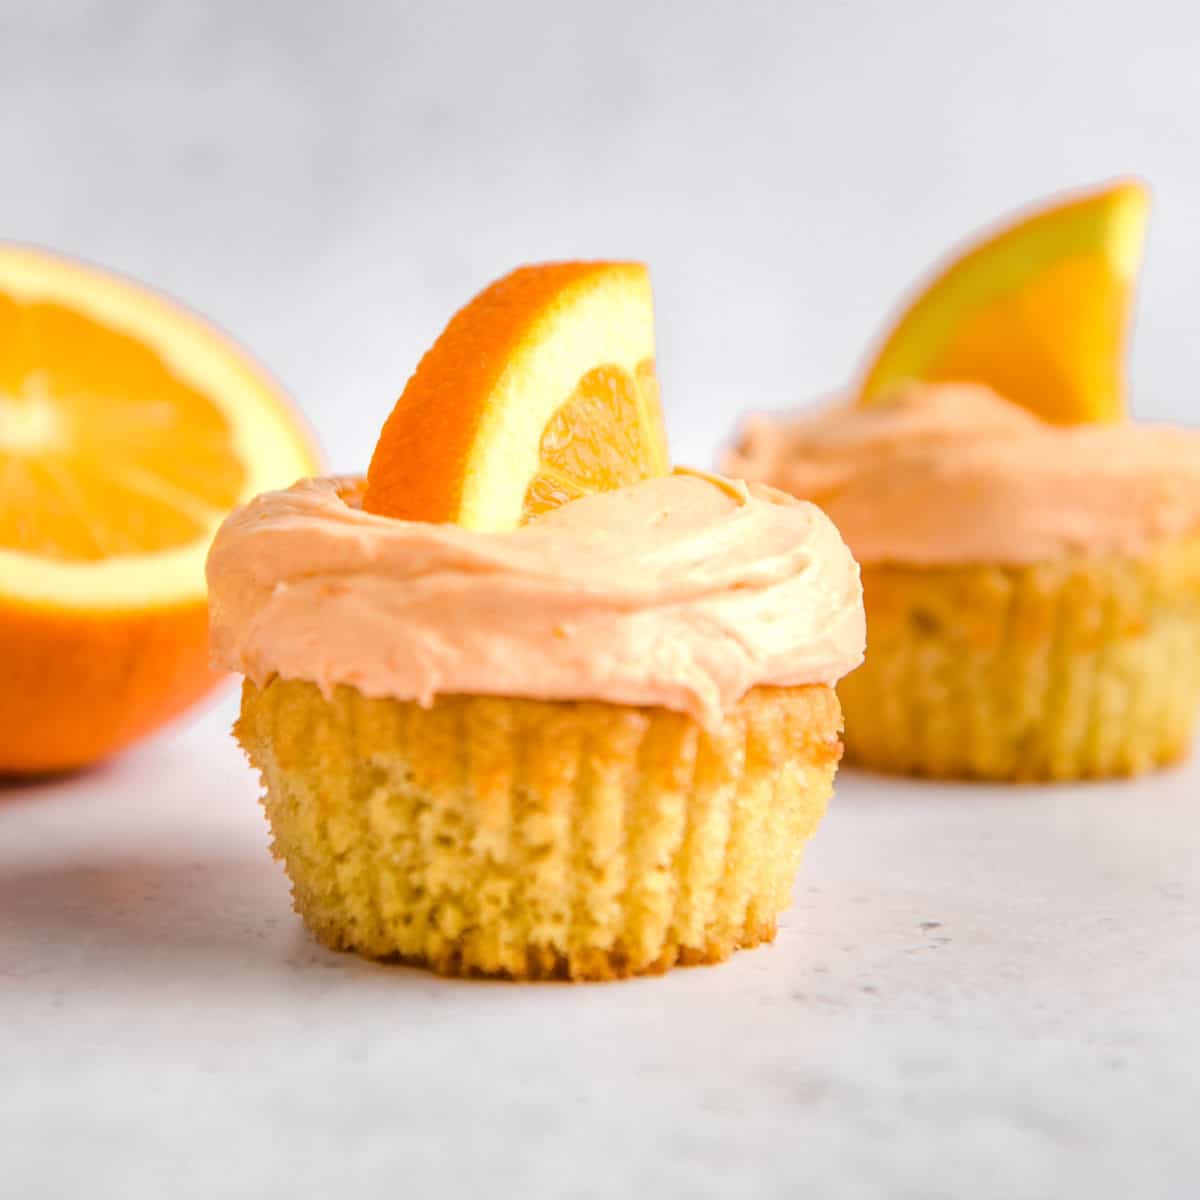 A cupcake with orange frosting.